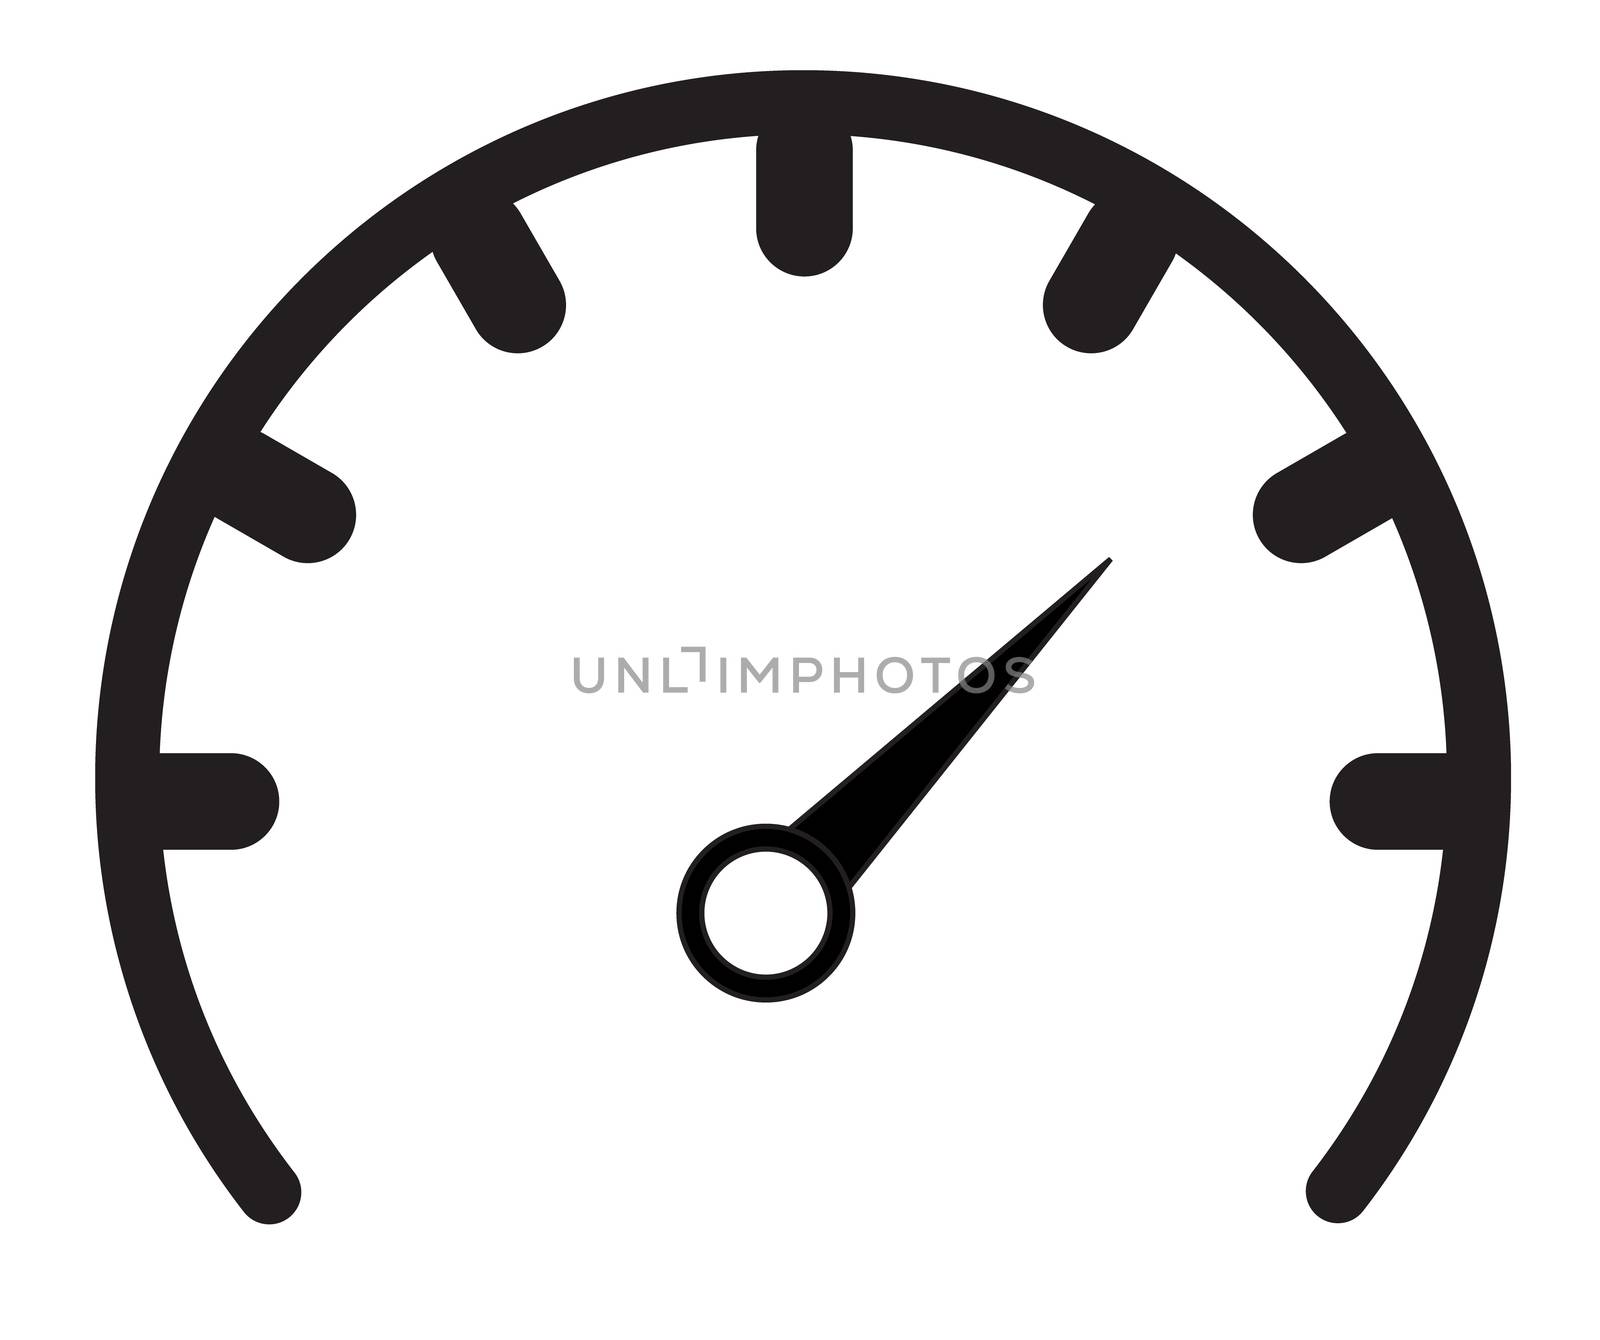 speedometer icon on white background. flat style. speedometer icon for your web site design, logo, app, UI. performance measurement symbol. tachometer sign.

